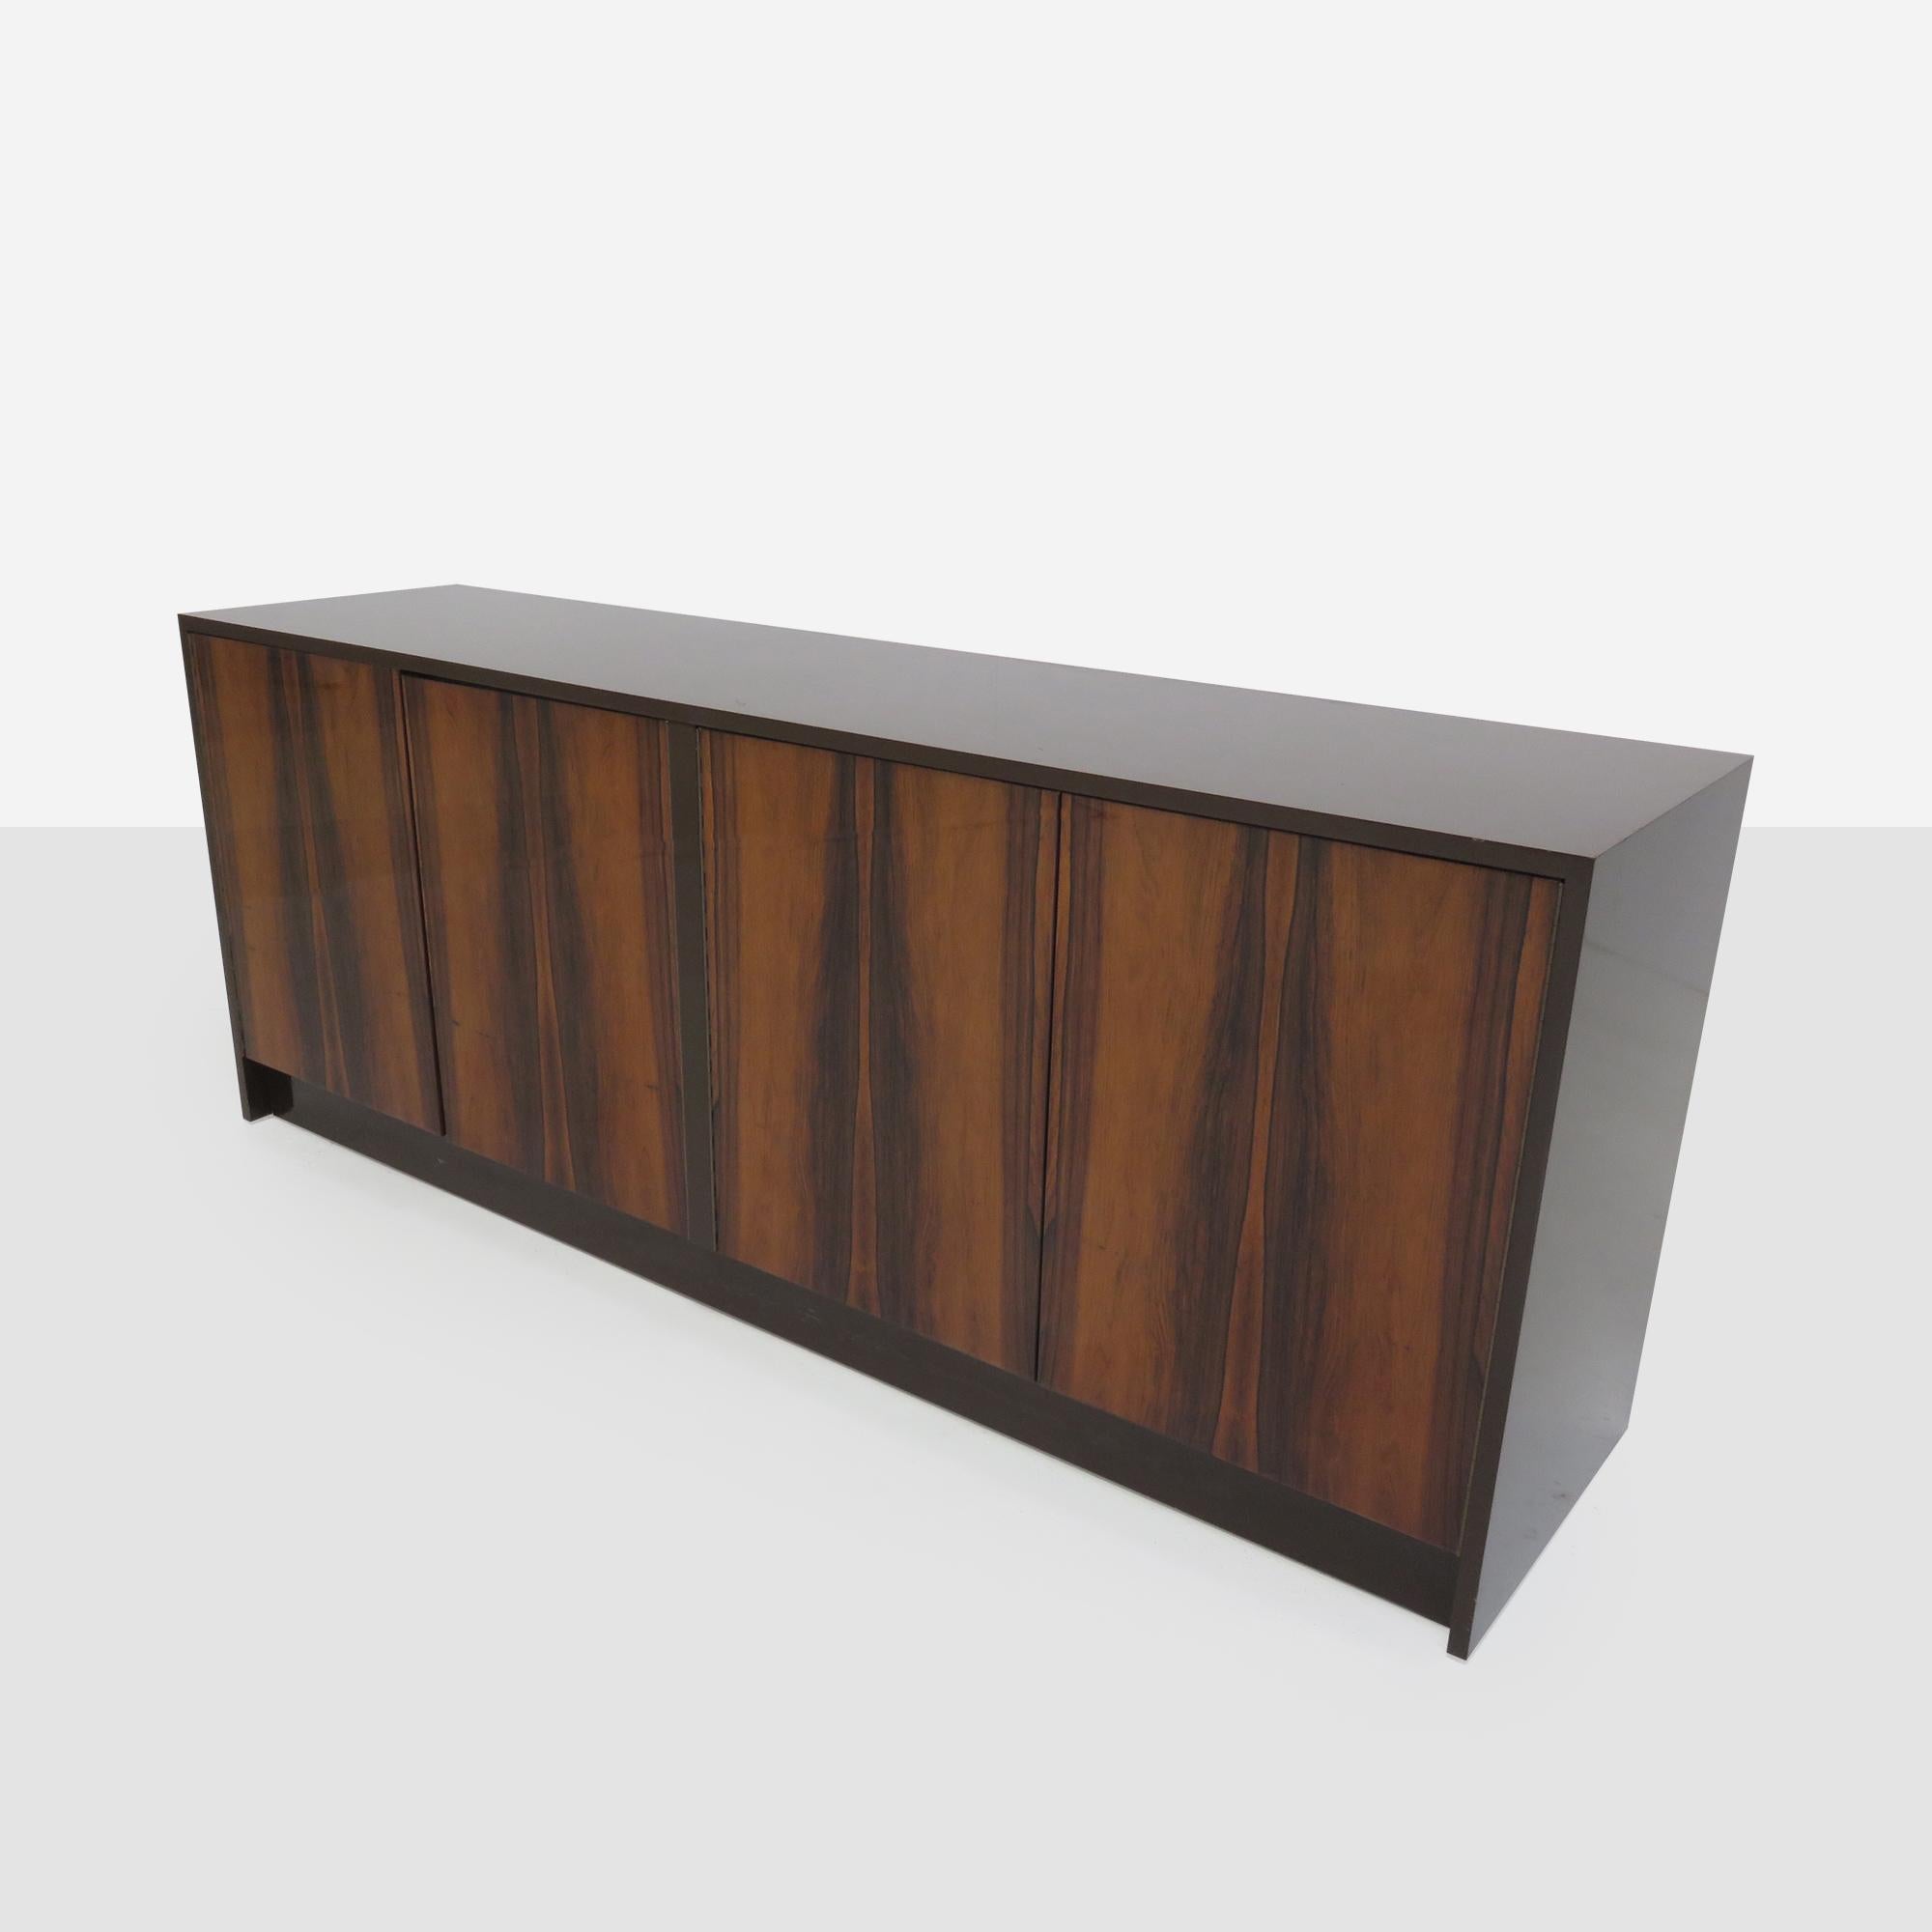 Vintage four door credenza features a beautiful grain, rosewood body and a shiny lacquered finish . There are 2 interior sliding drawers and 2 shelves.